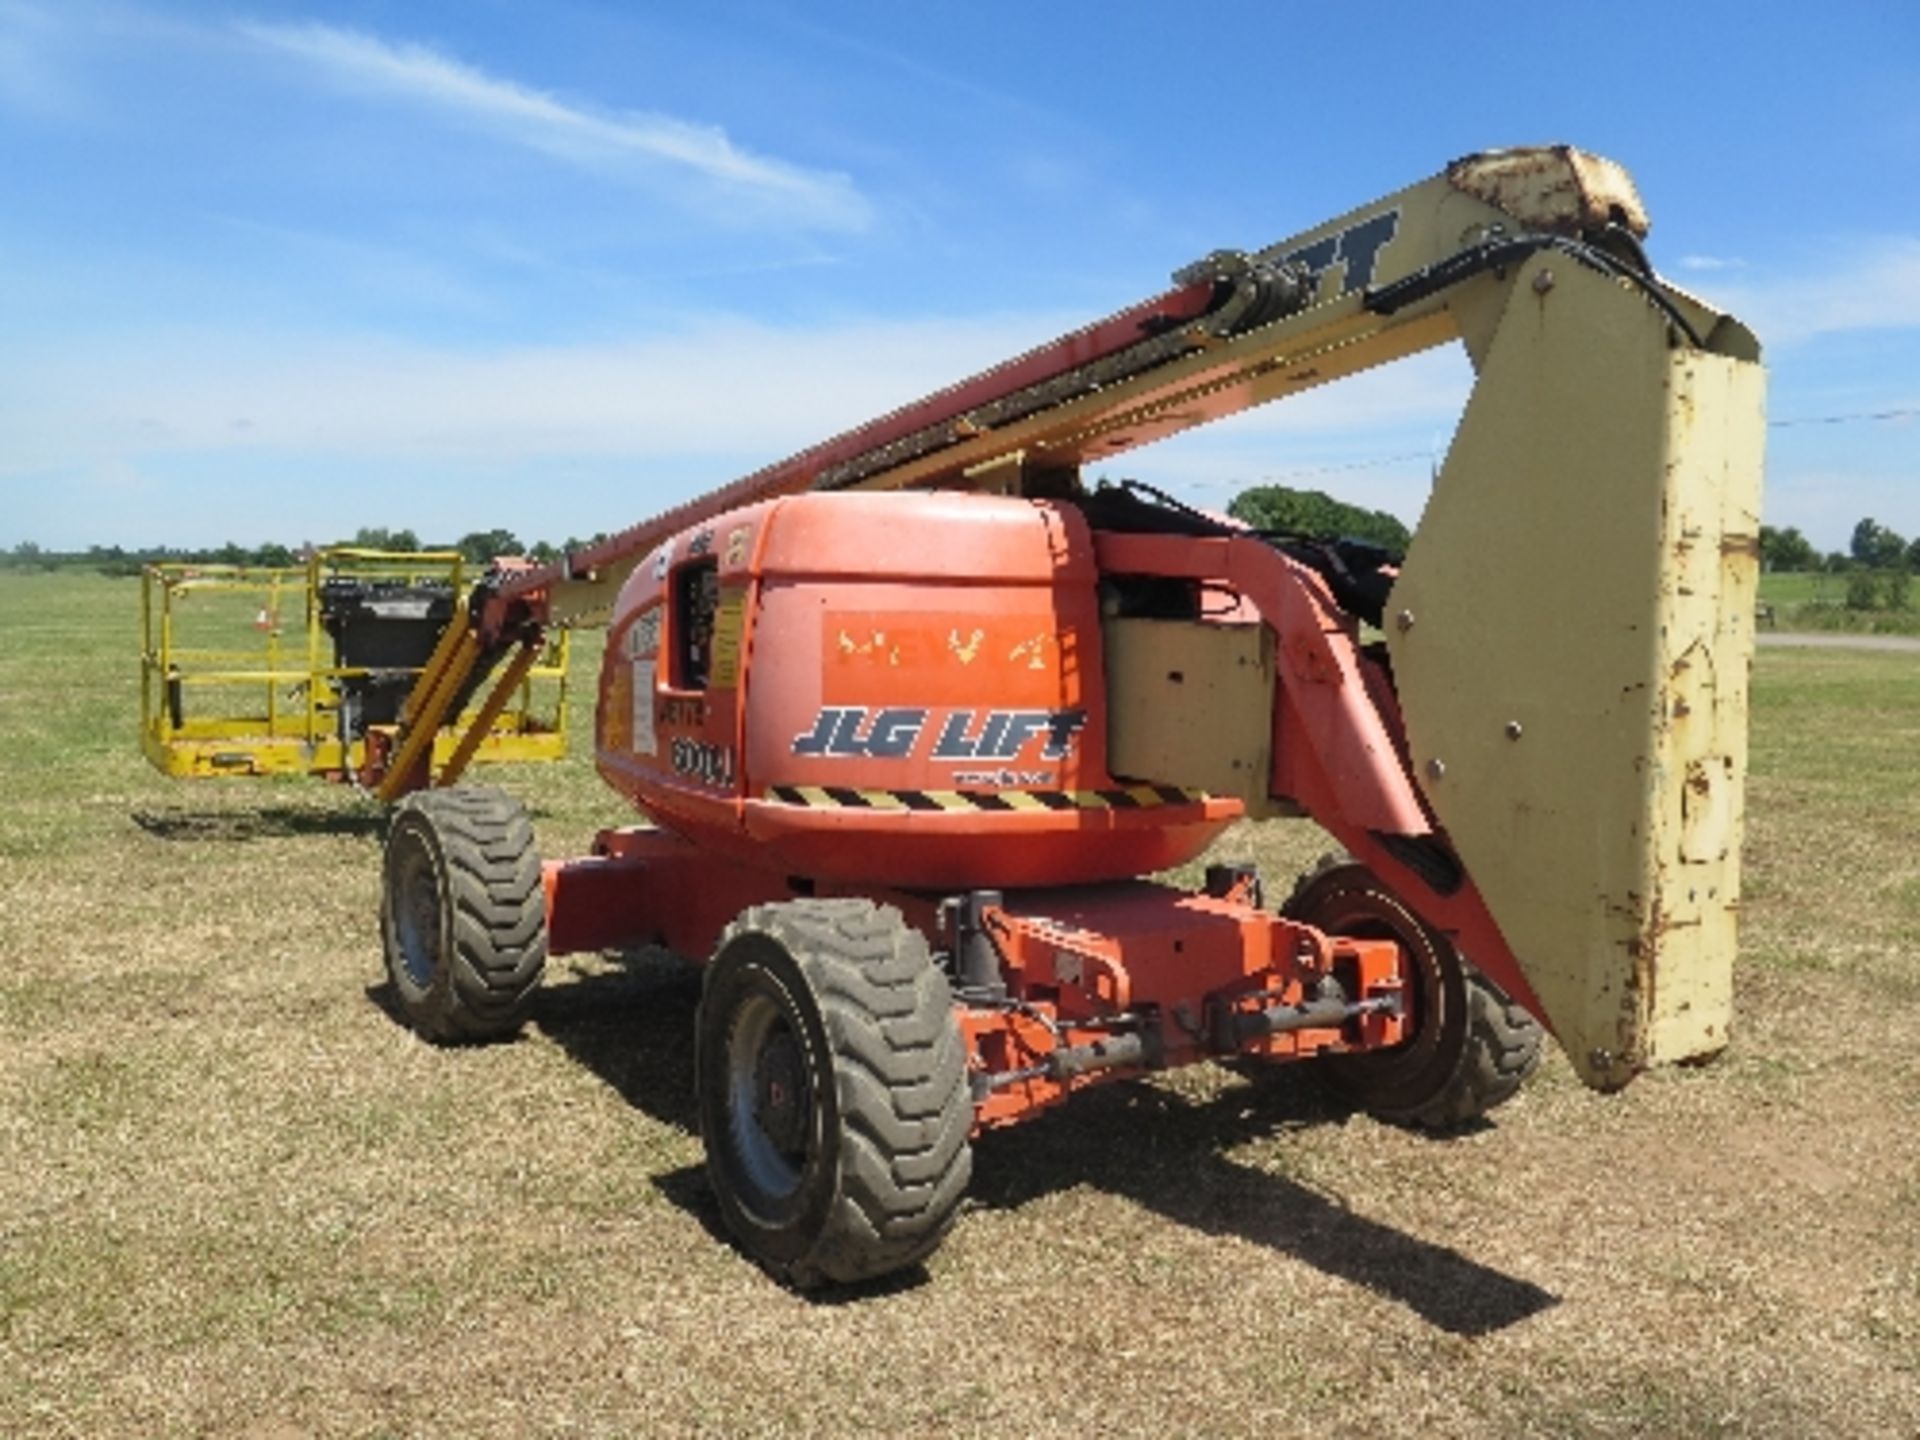 JLG 600AJ artic boom 2004 AB778
3,452 HOURS
ALL LOTS are SOLD AS SEEN WITHOUT WARRANTY